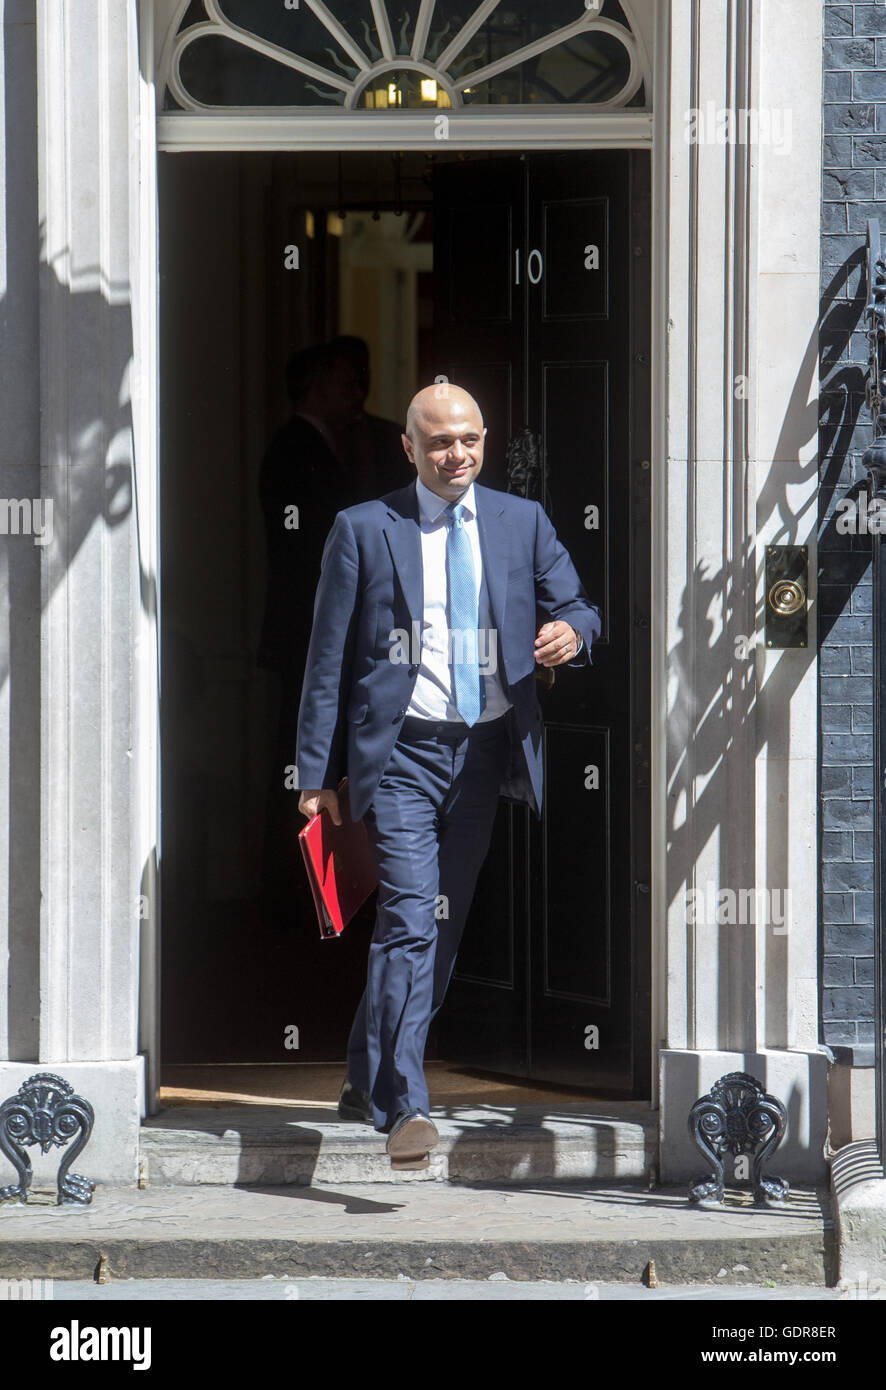 Sajid Javid, Secretary Of State for Communities and Local Government Blätter Nr. 10 nach Theresa Mays erste Kabinettssitzung Stockfoto